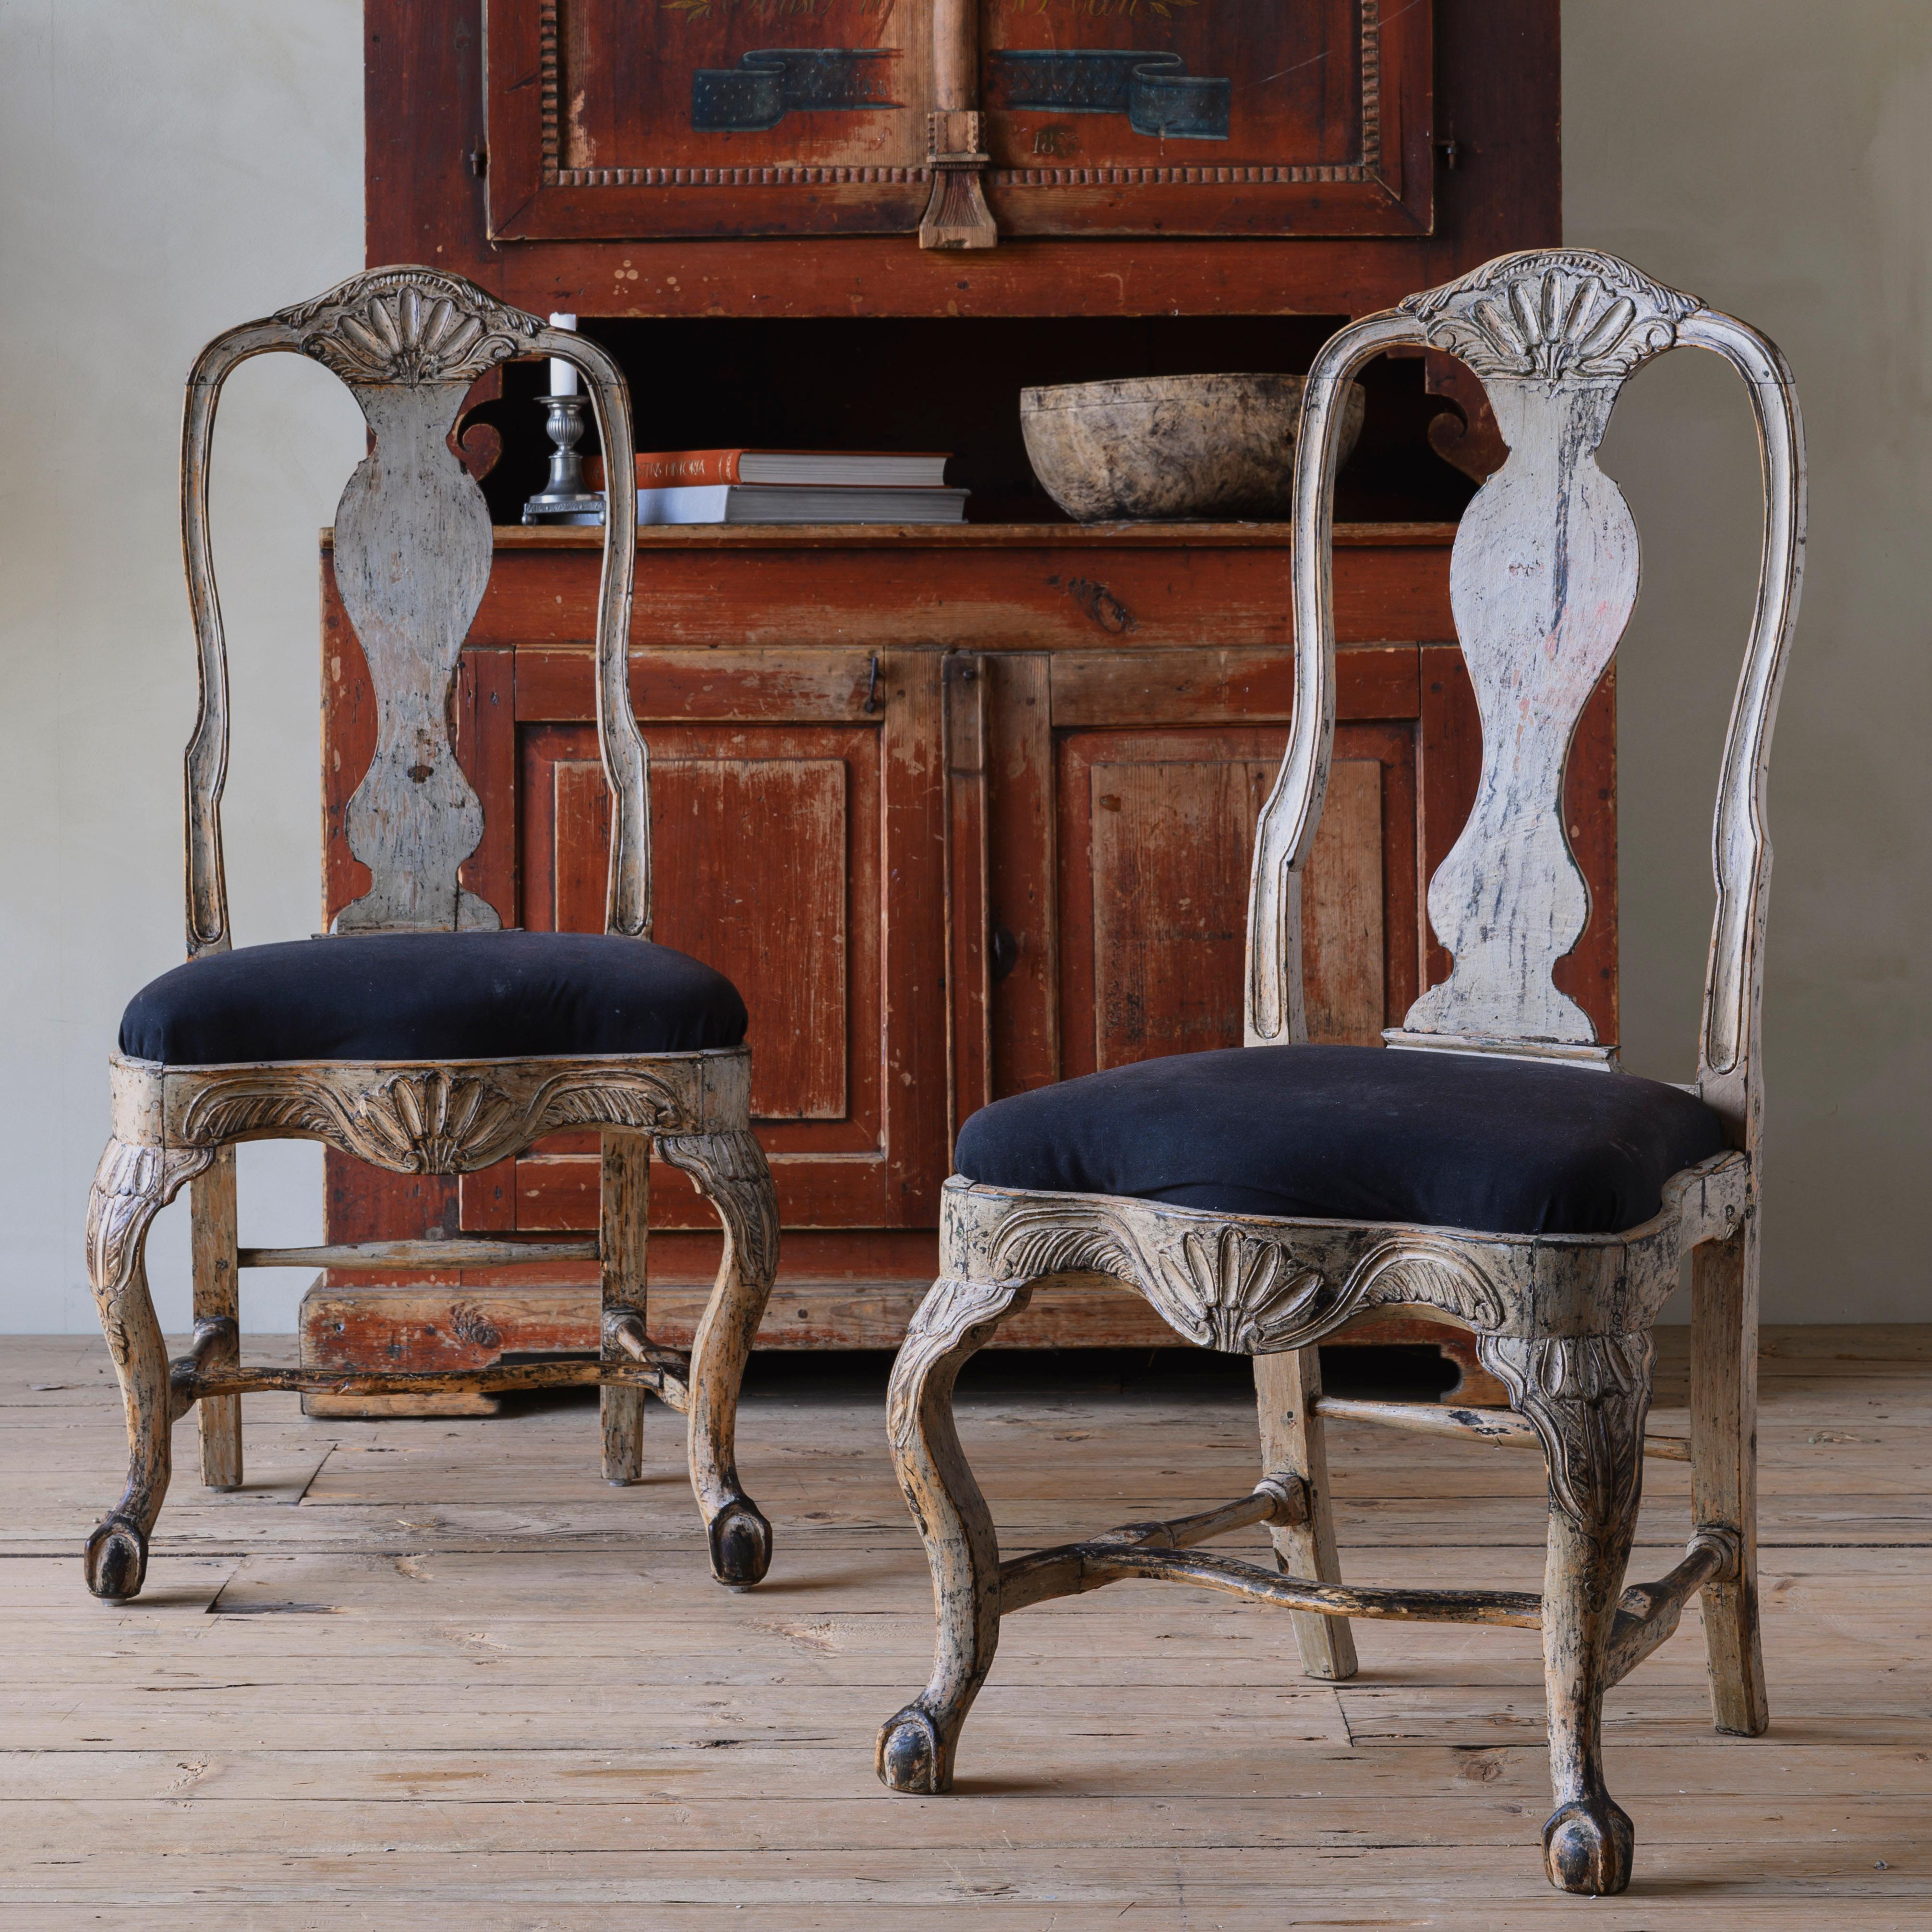 Fine pair of 18th century Swedish Rococo chairs in their original finish and rich in detailed carvings throughout. Ca 1760 Sweden.